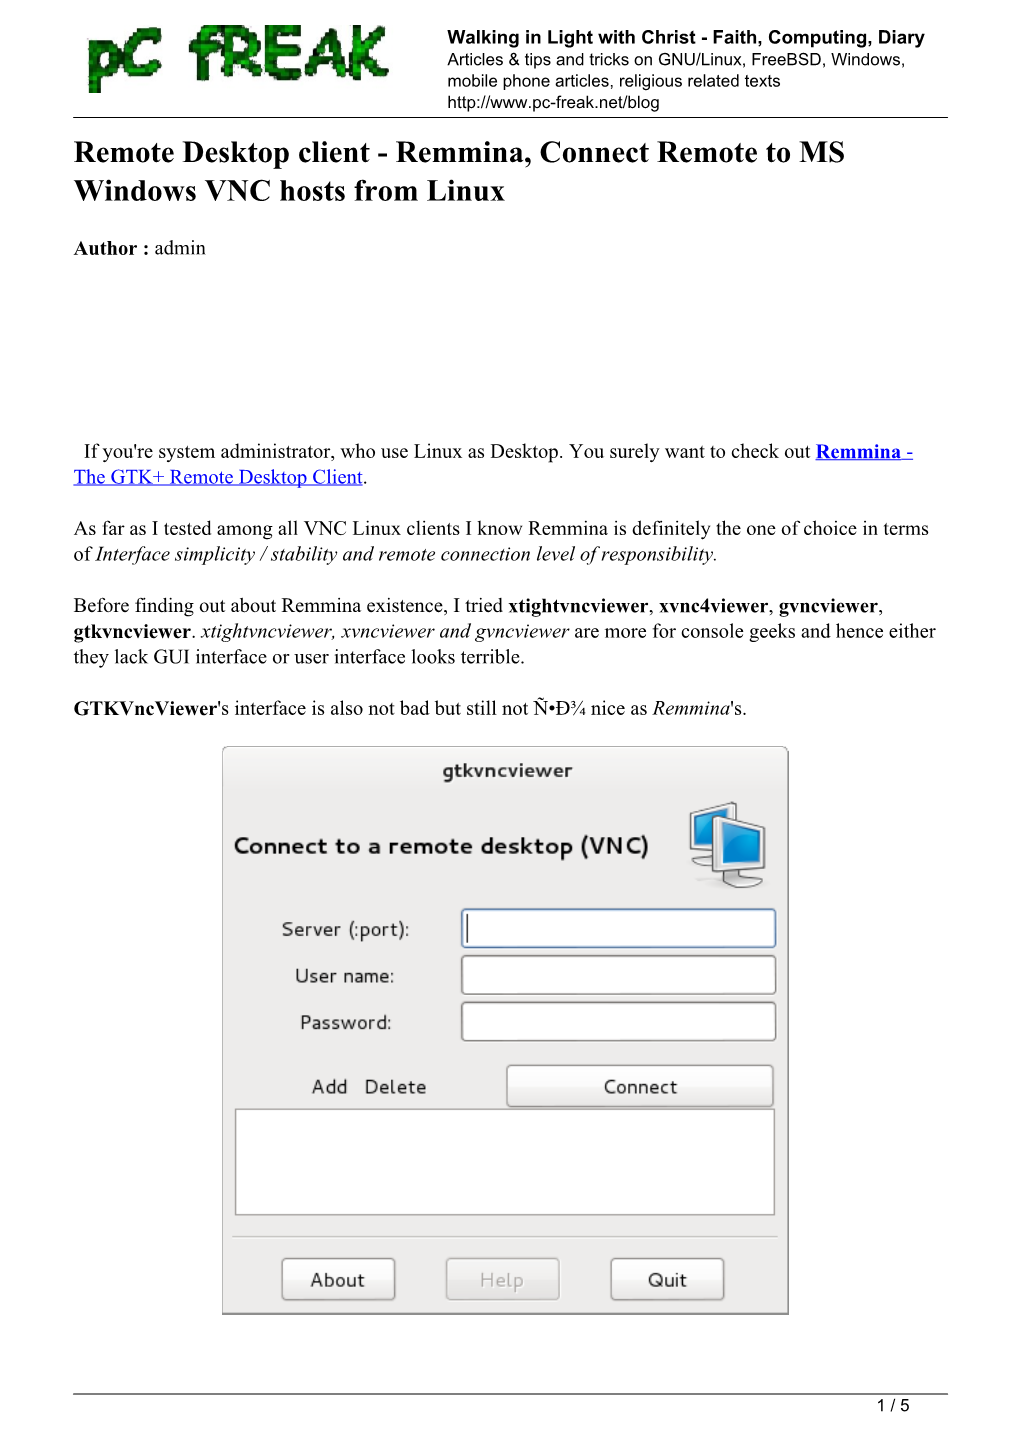 Remote Desktop Client - Remmina, Connect Remote to MS Windows VNC Hosts from Linux